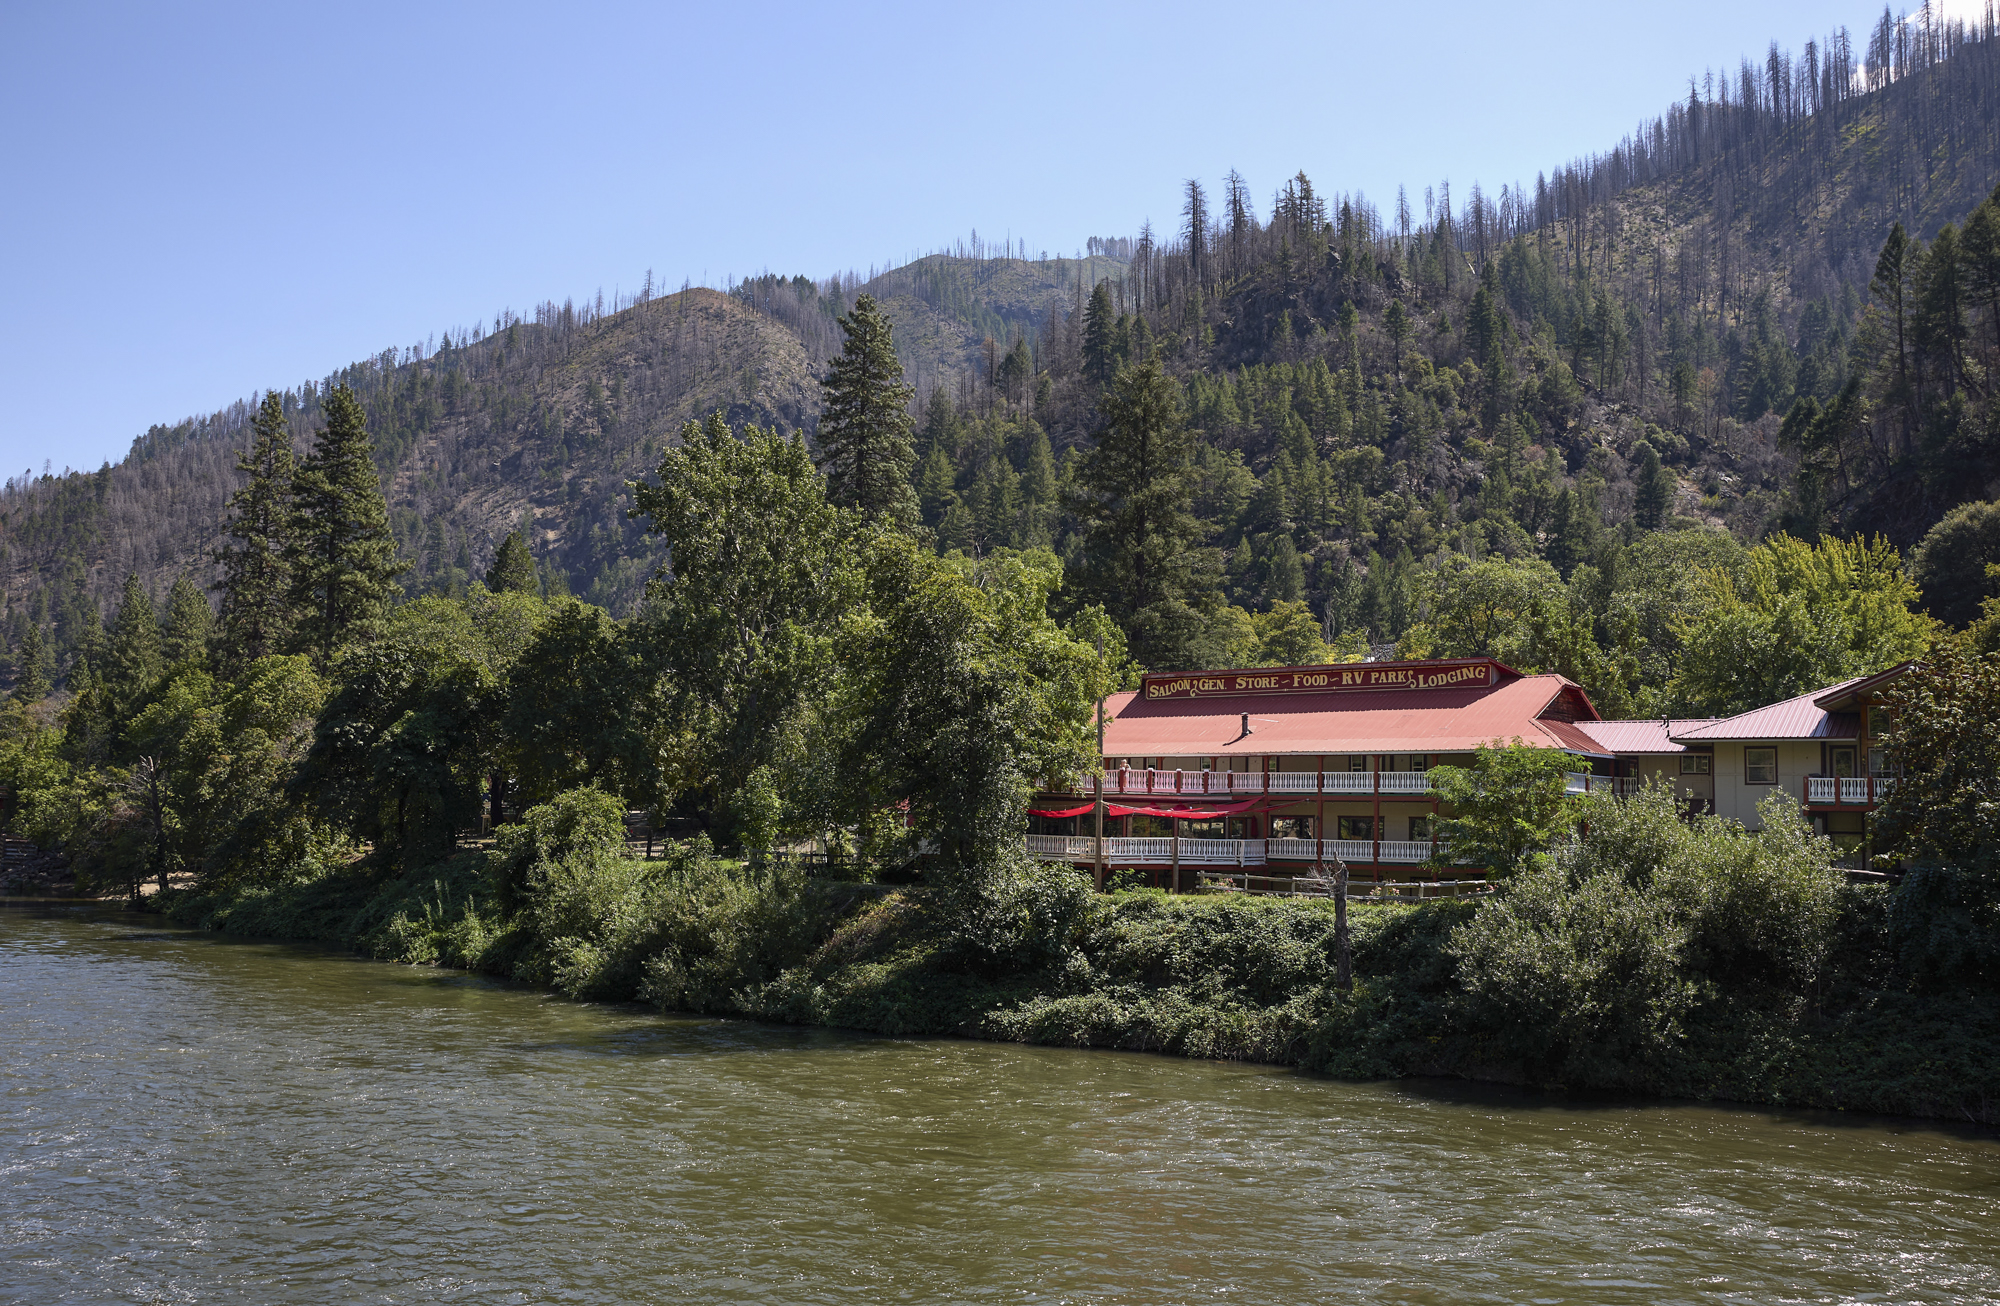 a building with a red roof sits among trees alongside a river